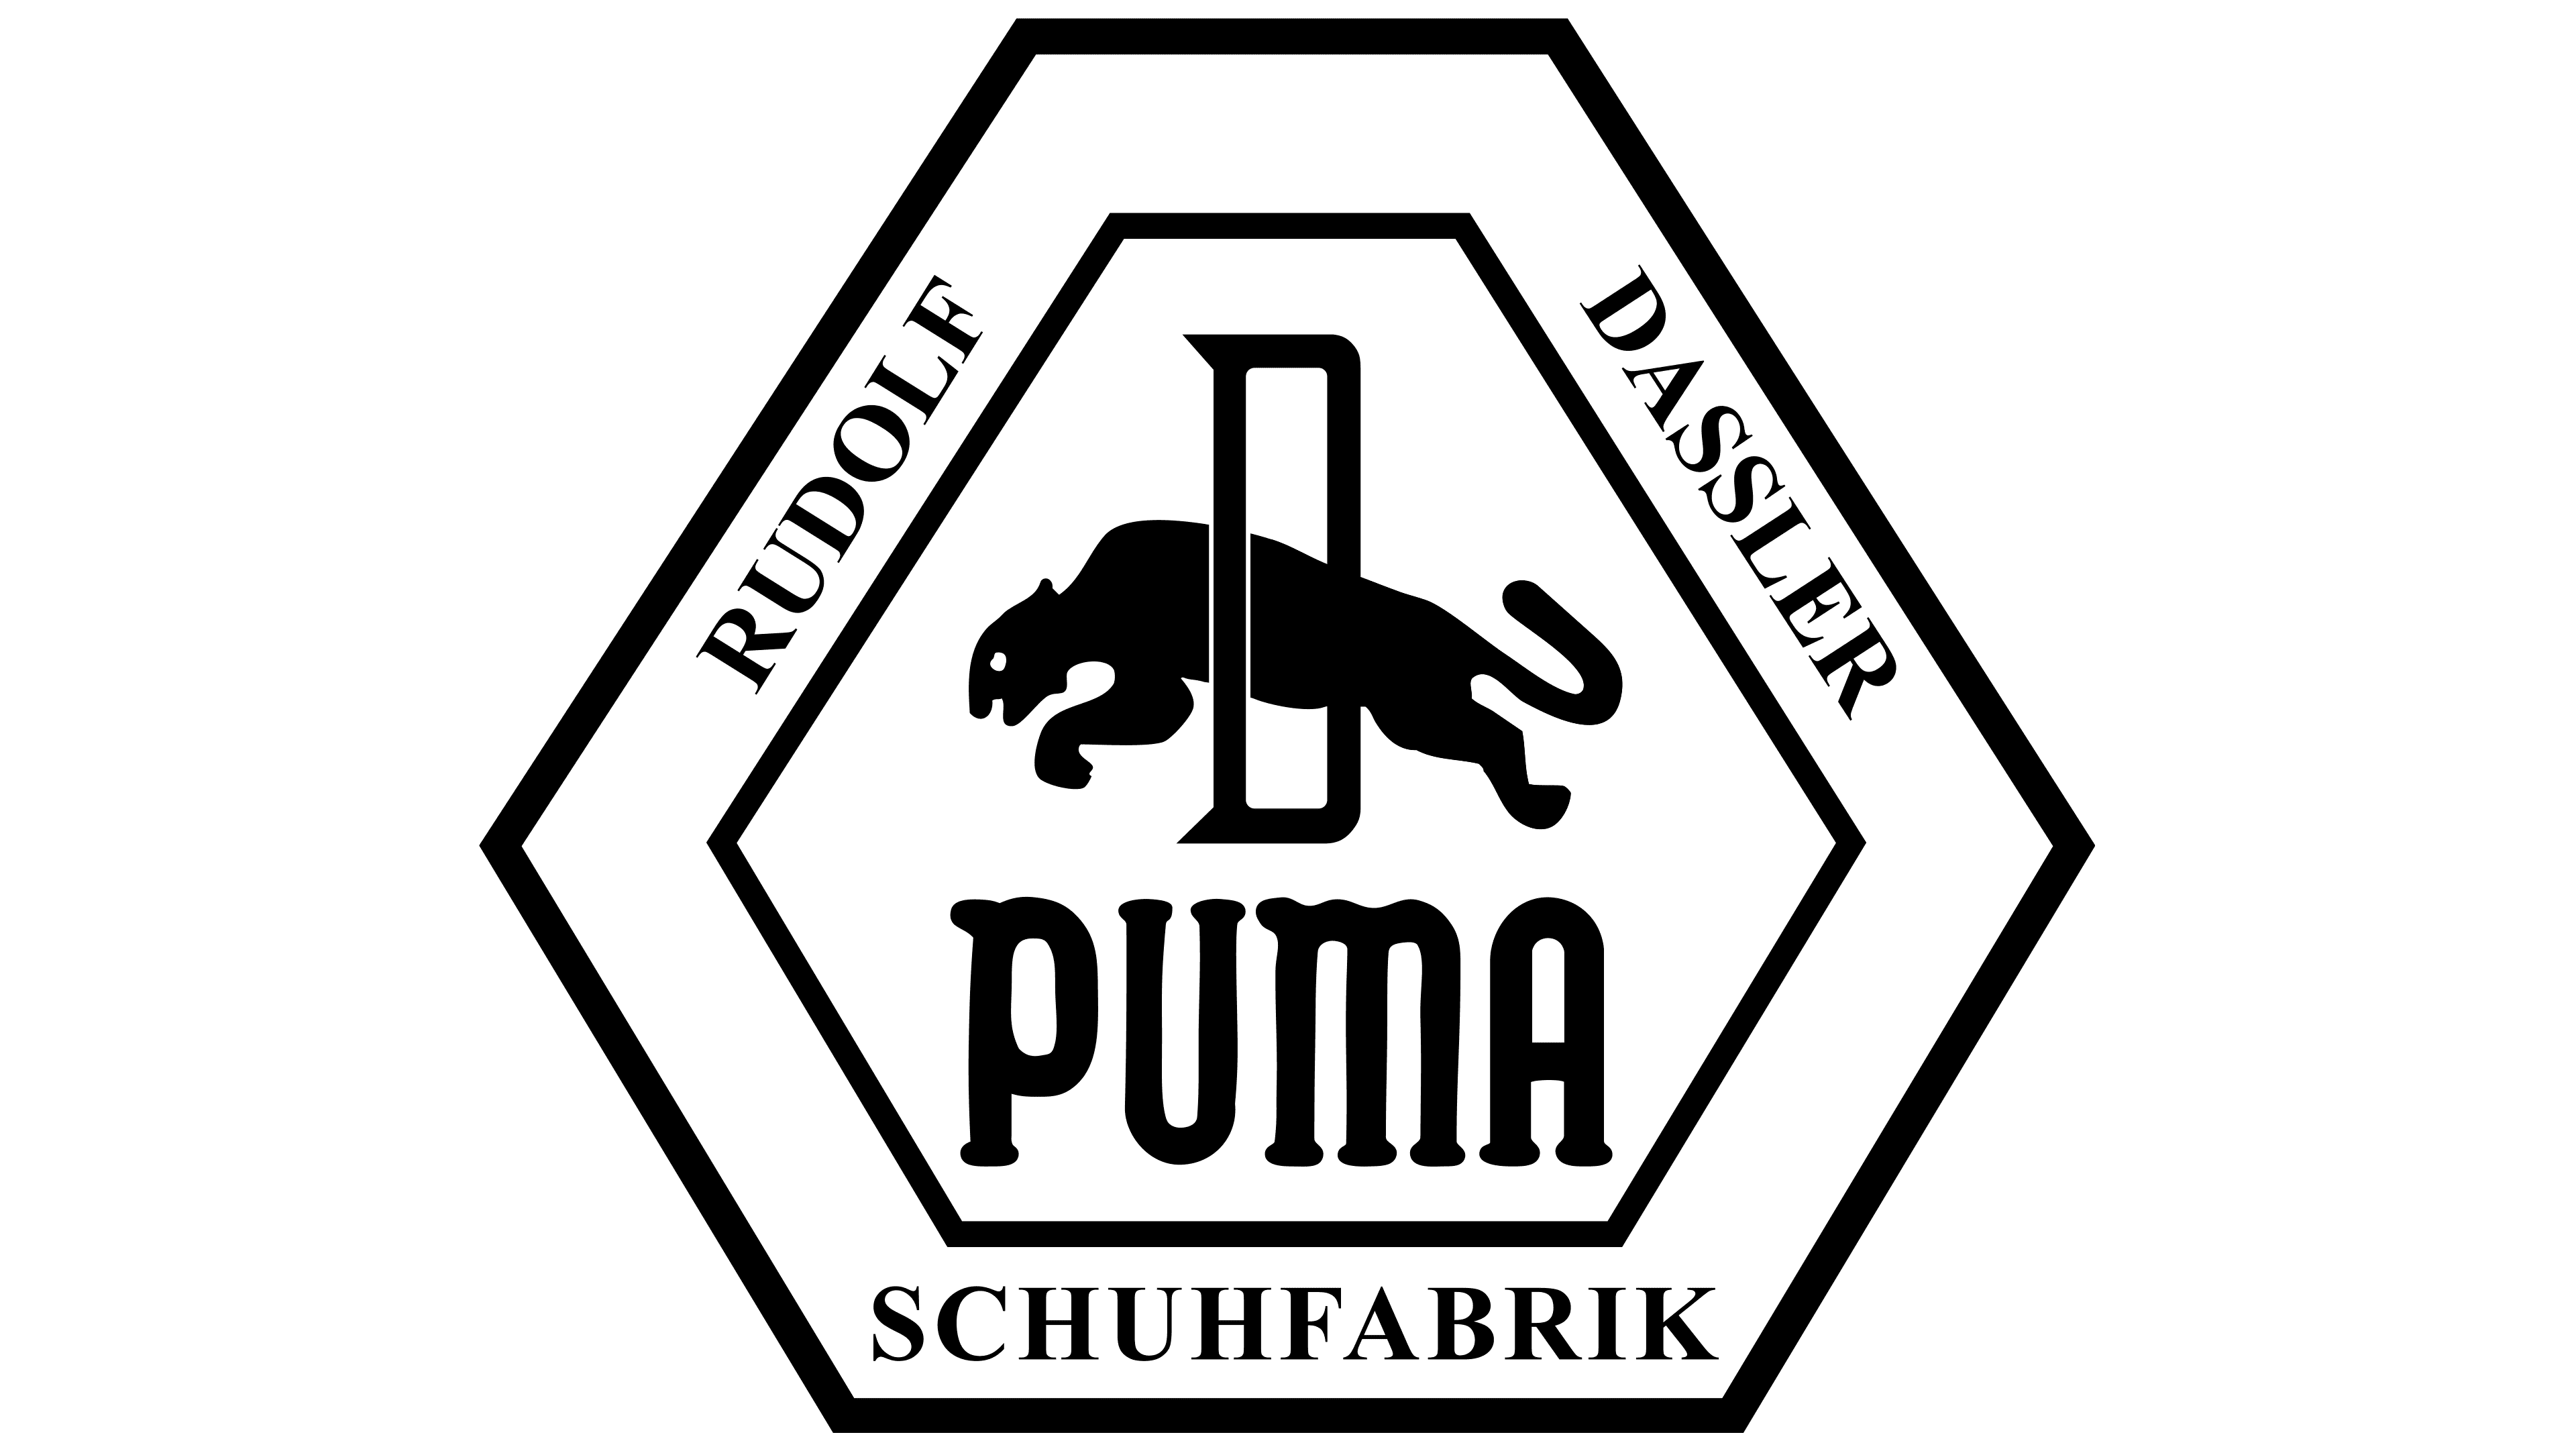 puma history and background